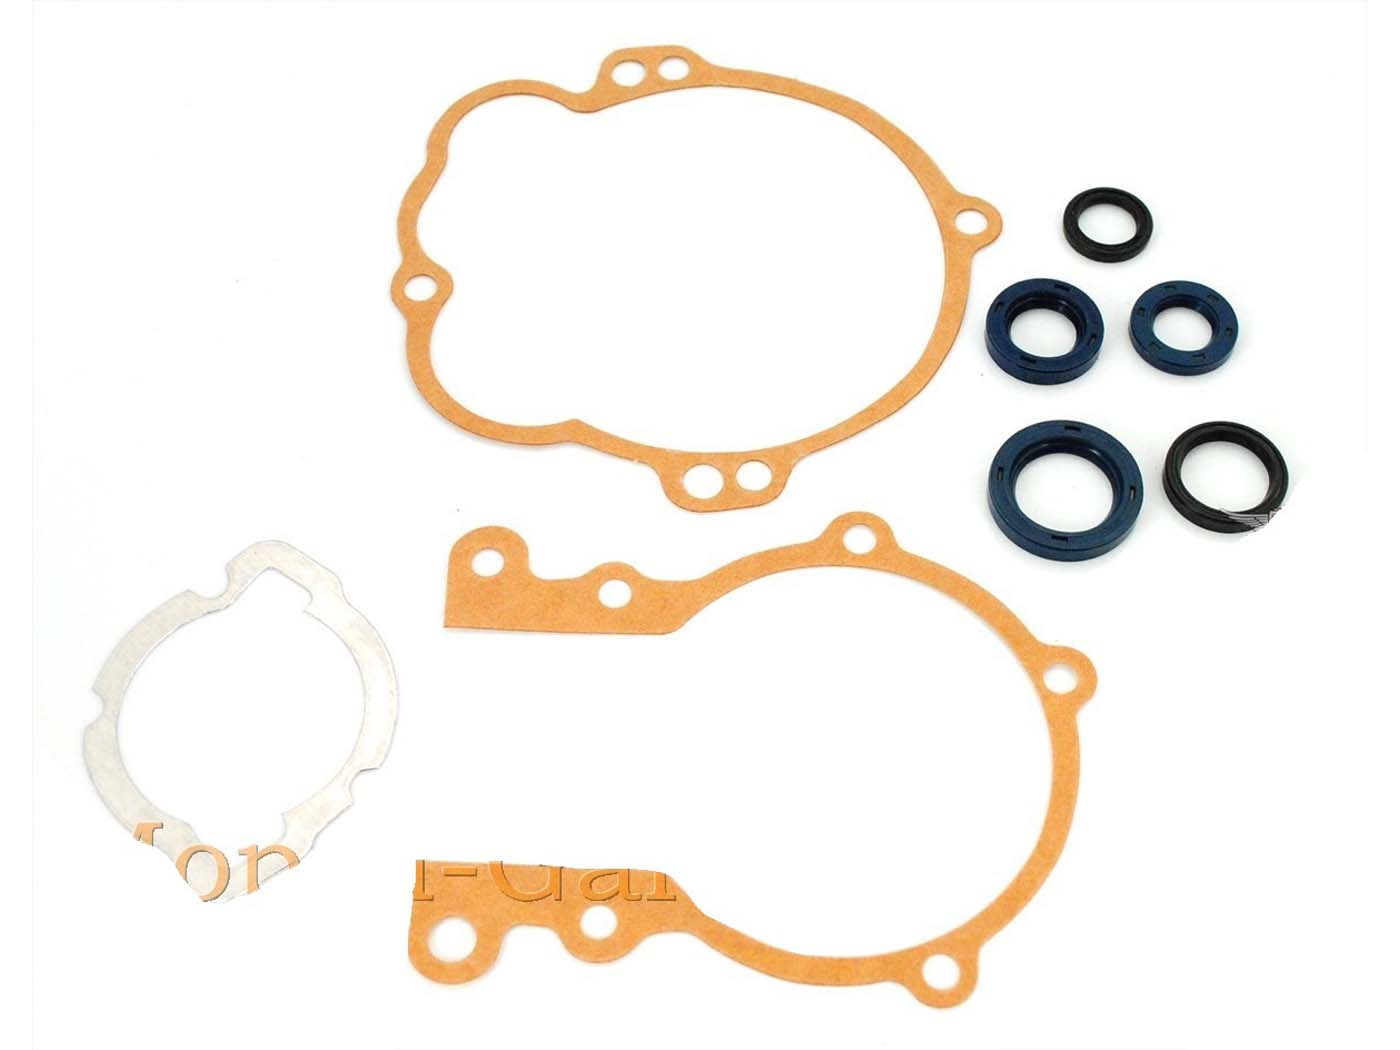 Cylinder Engine Gasket Oil Seal Set For Piaggio Ciao SI Bravo